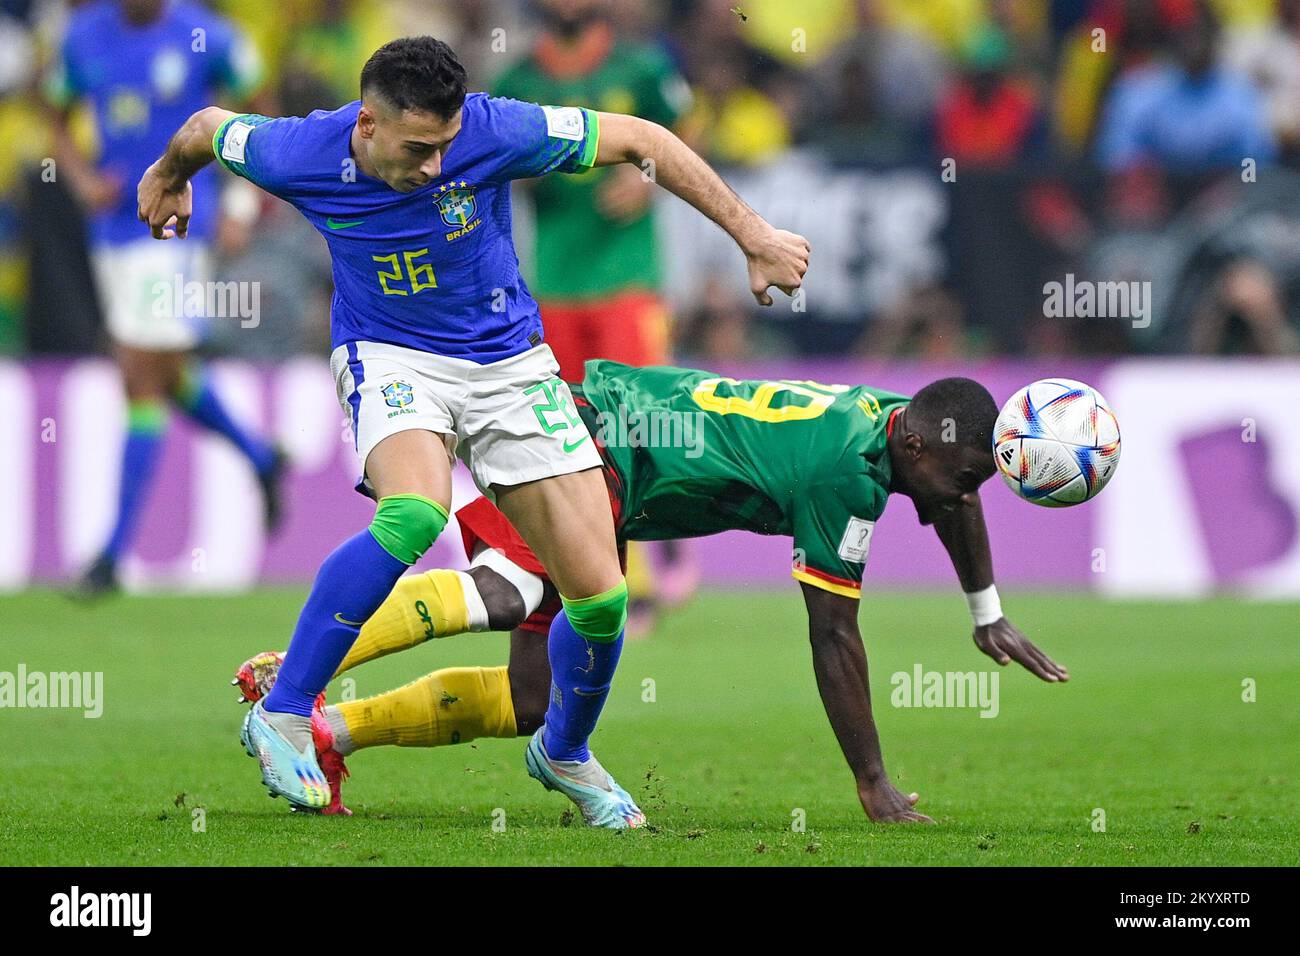 LUSAIL CITY, QATAR - DECEMBER 2: Gabriel Martinelli of Brazil battles for the ball with Collins Fai of Cameroon during the Group G - FIFA World Cup Qatar 2022 match between Cameroon and Brazil at the Lusail Stadium on December 2, 2022 in Lusail City, Qatar (Photo by Pablo Morano/BSR Agency) Stock Photo